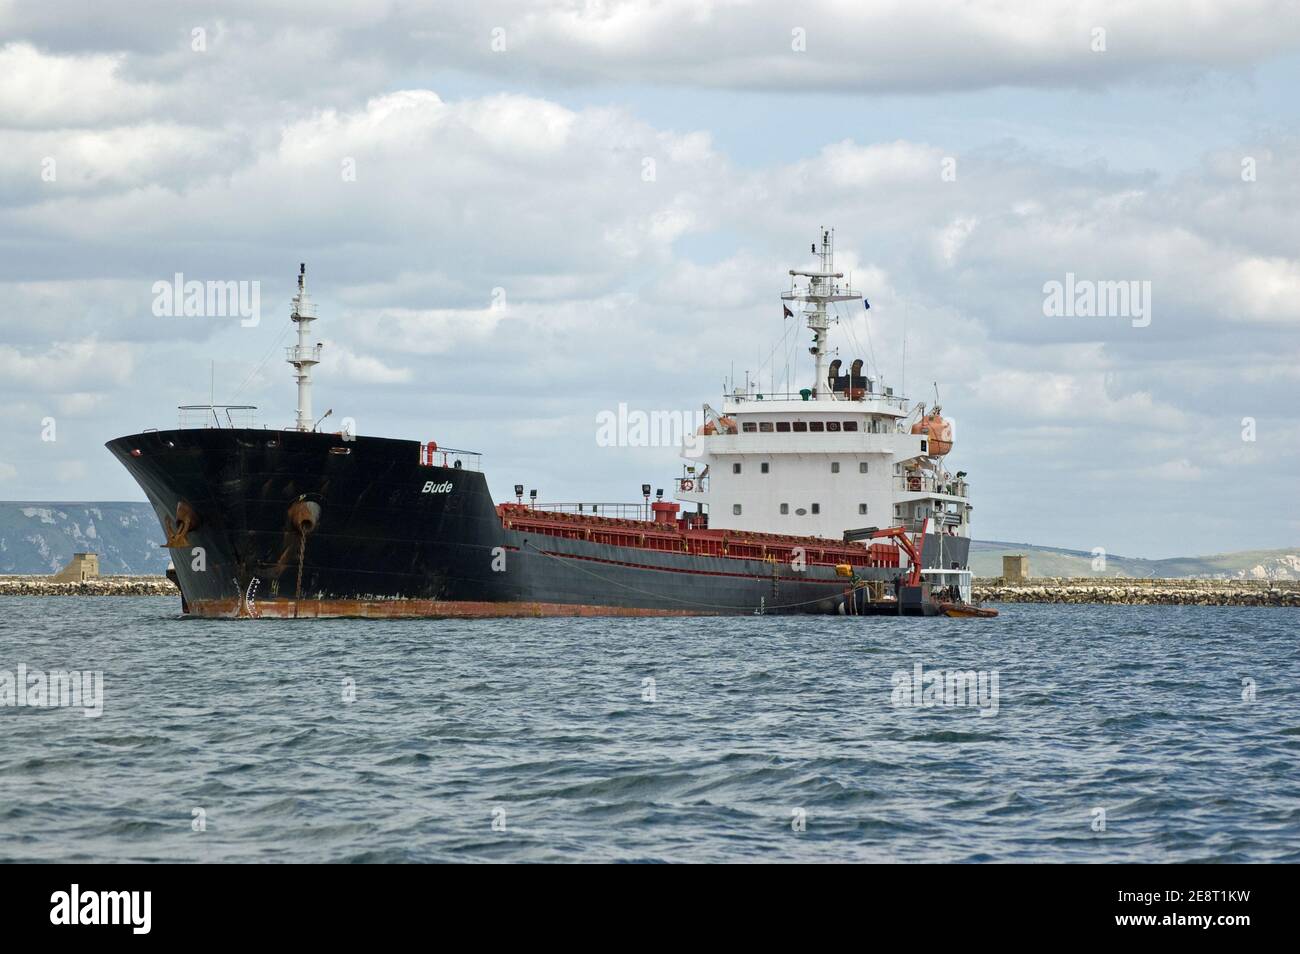 PORTLAND, DORSET, ENGLAND - AUGUST 31: Bulk carrier Bude at anchor in Portland Harbour on August 31 2012. The ship carries vital supplies around Europ Stock Photo